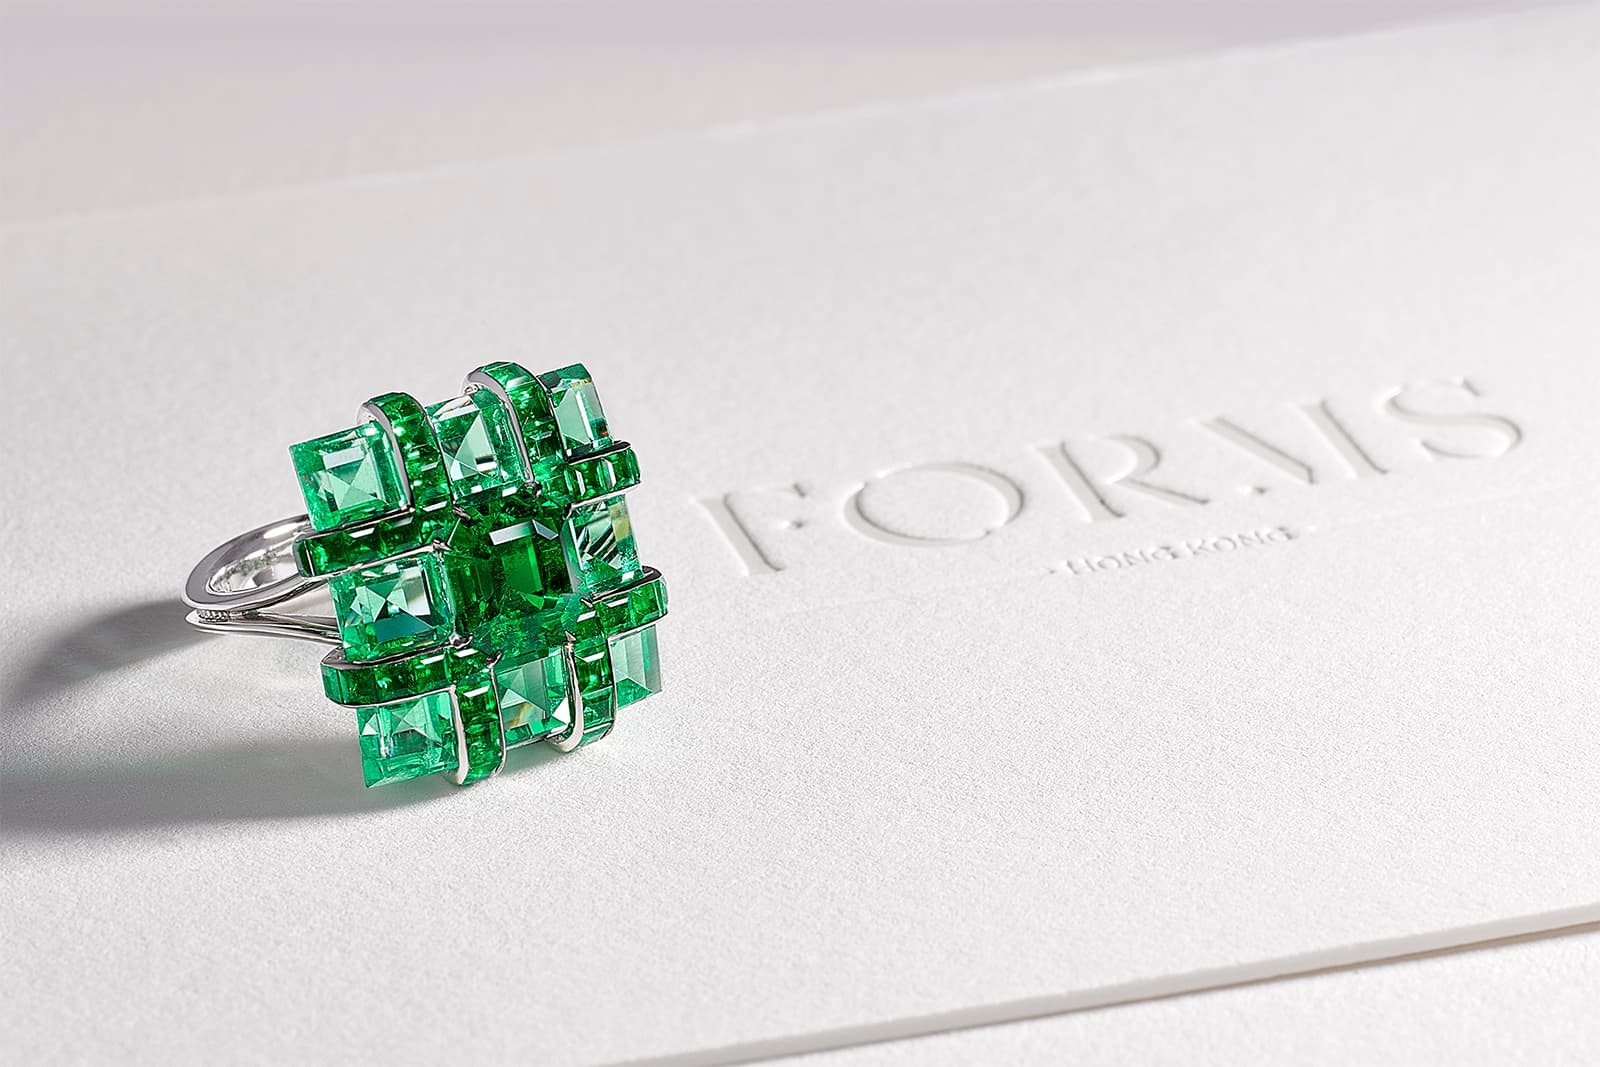 A ring from the Canvas collection featuring a 1.90 carat emerald cut Colombian emerald set within a matrix of eight carefully matched emeralds in lighter shades